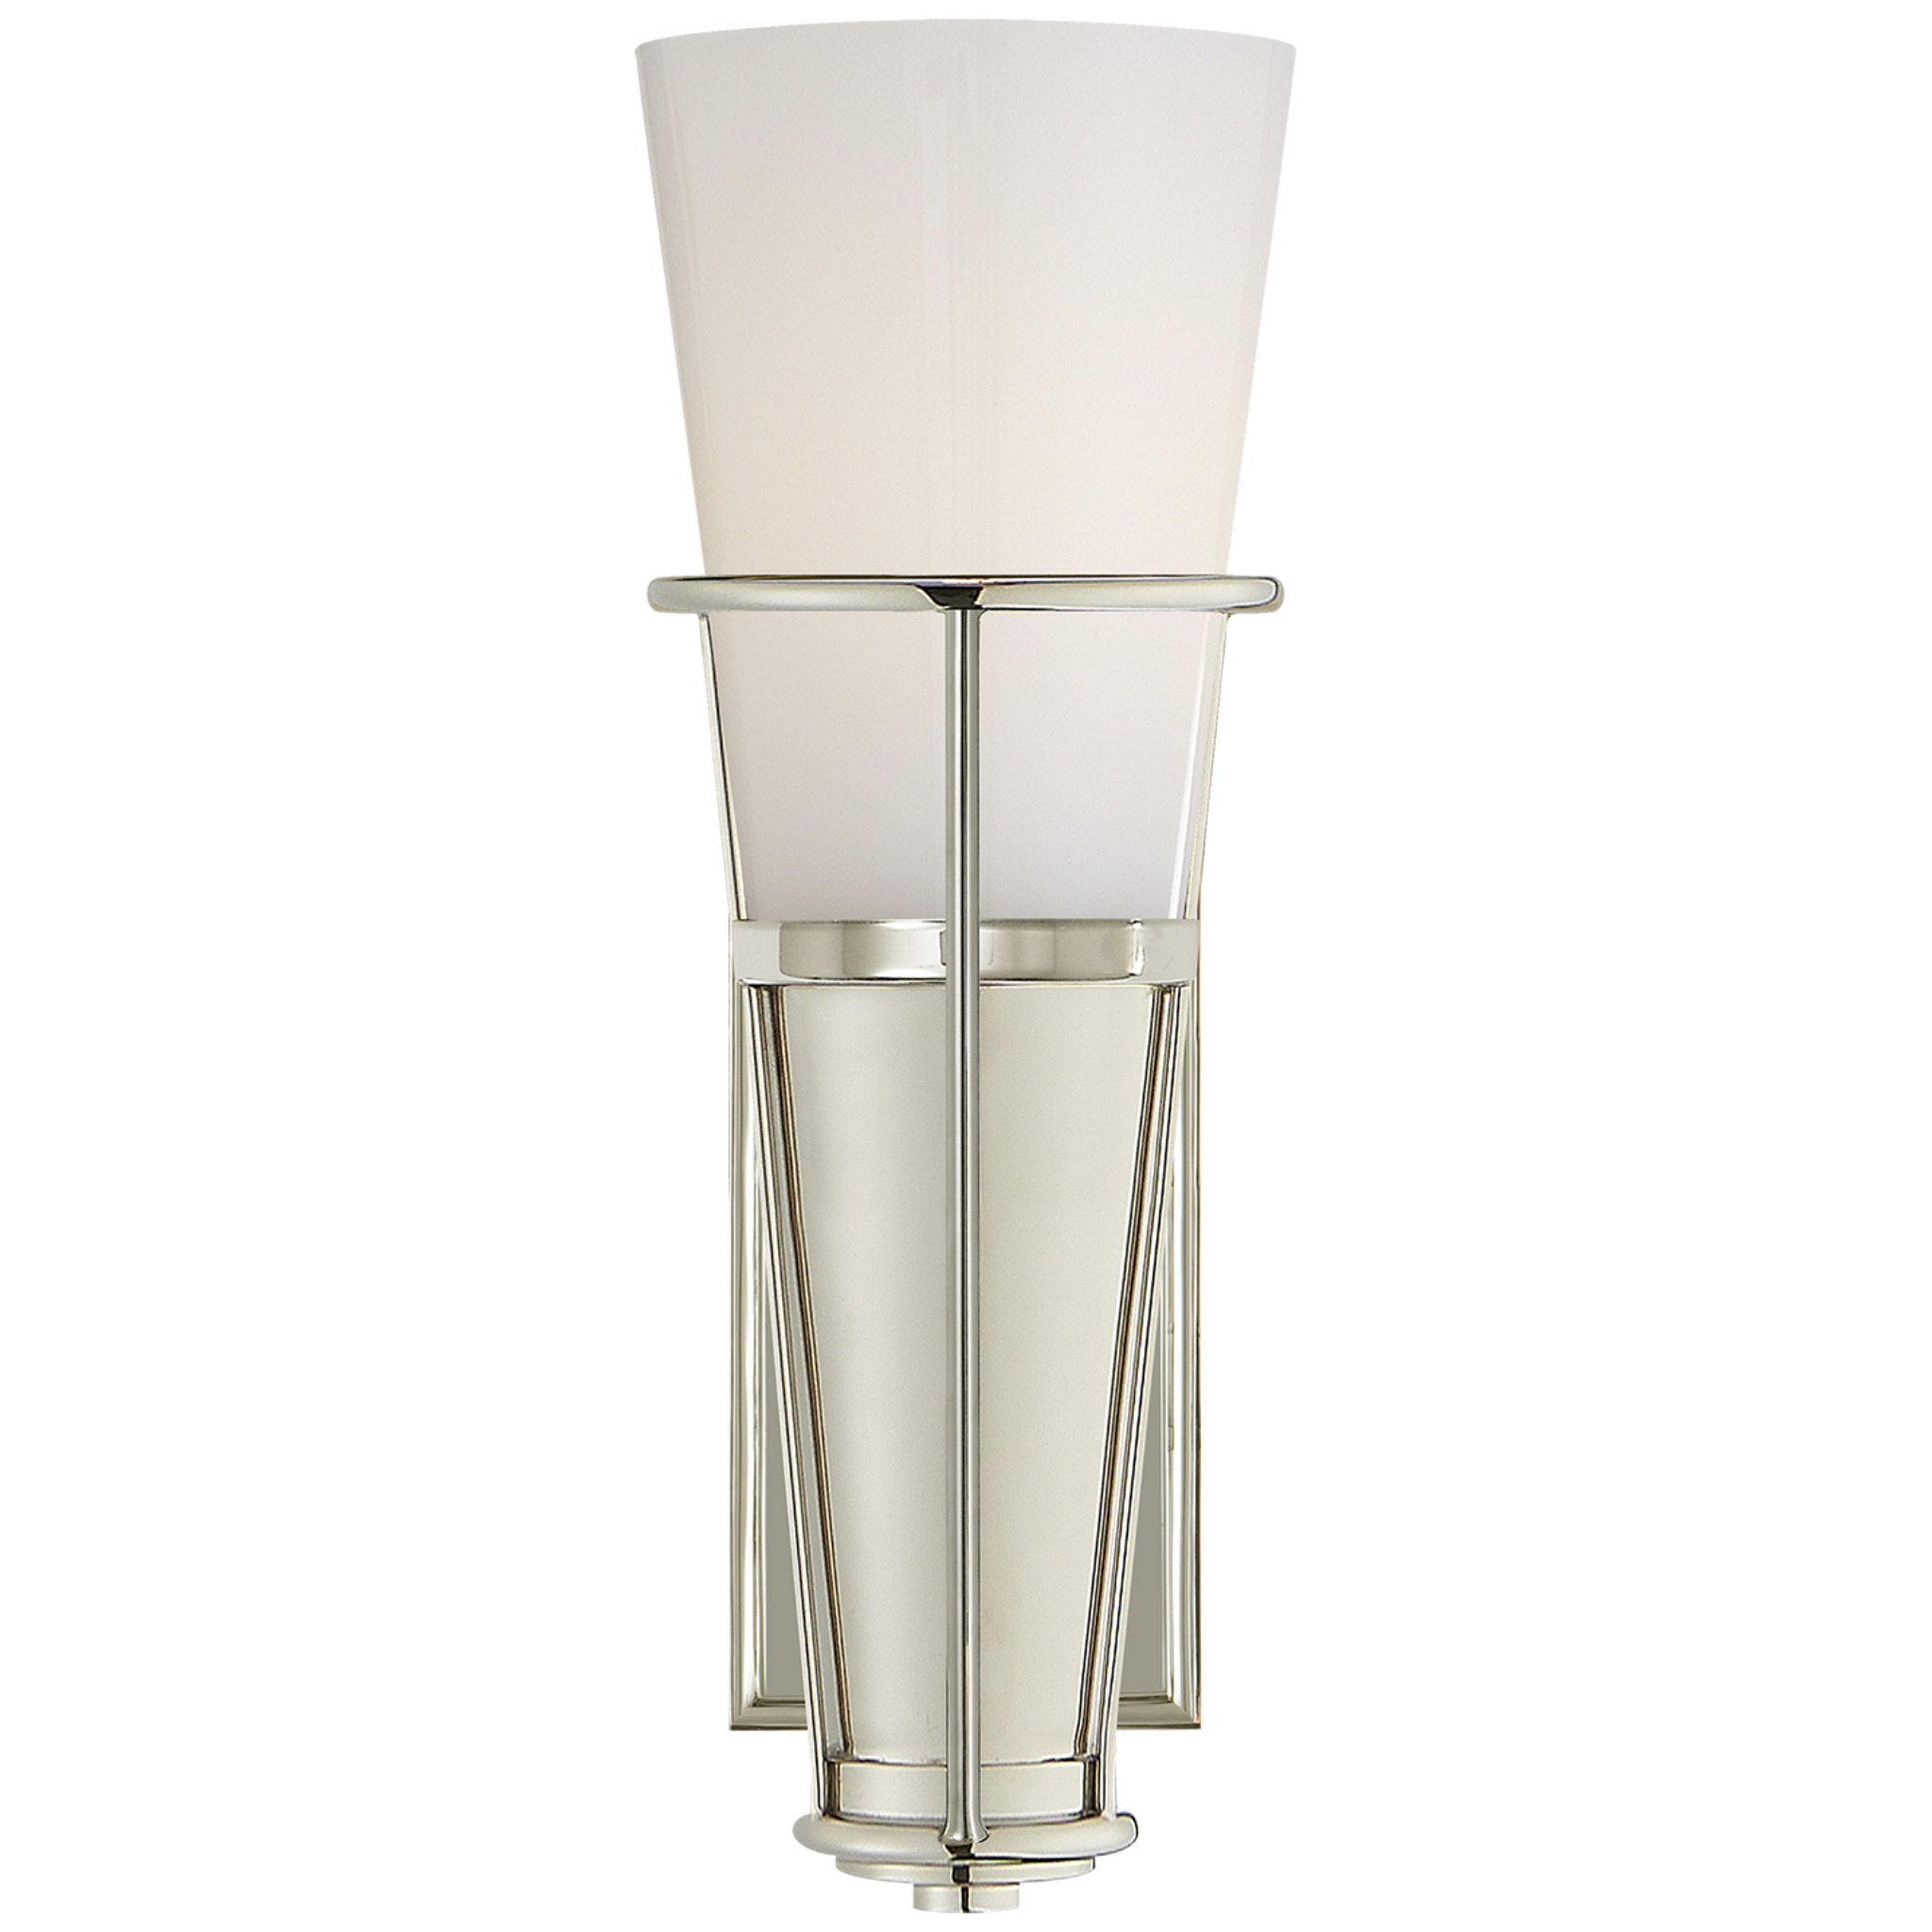 Thomas O'Brien Robinson Single Sconce in Polished Nickel with White Glass